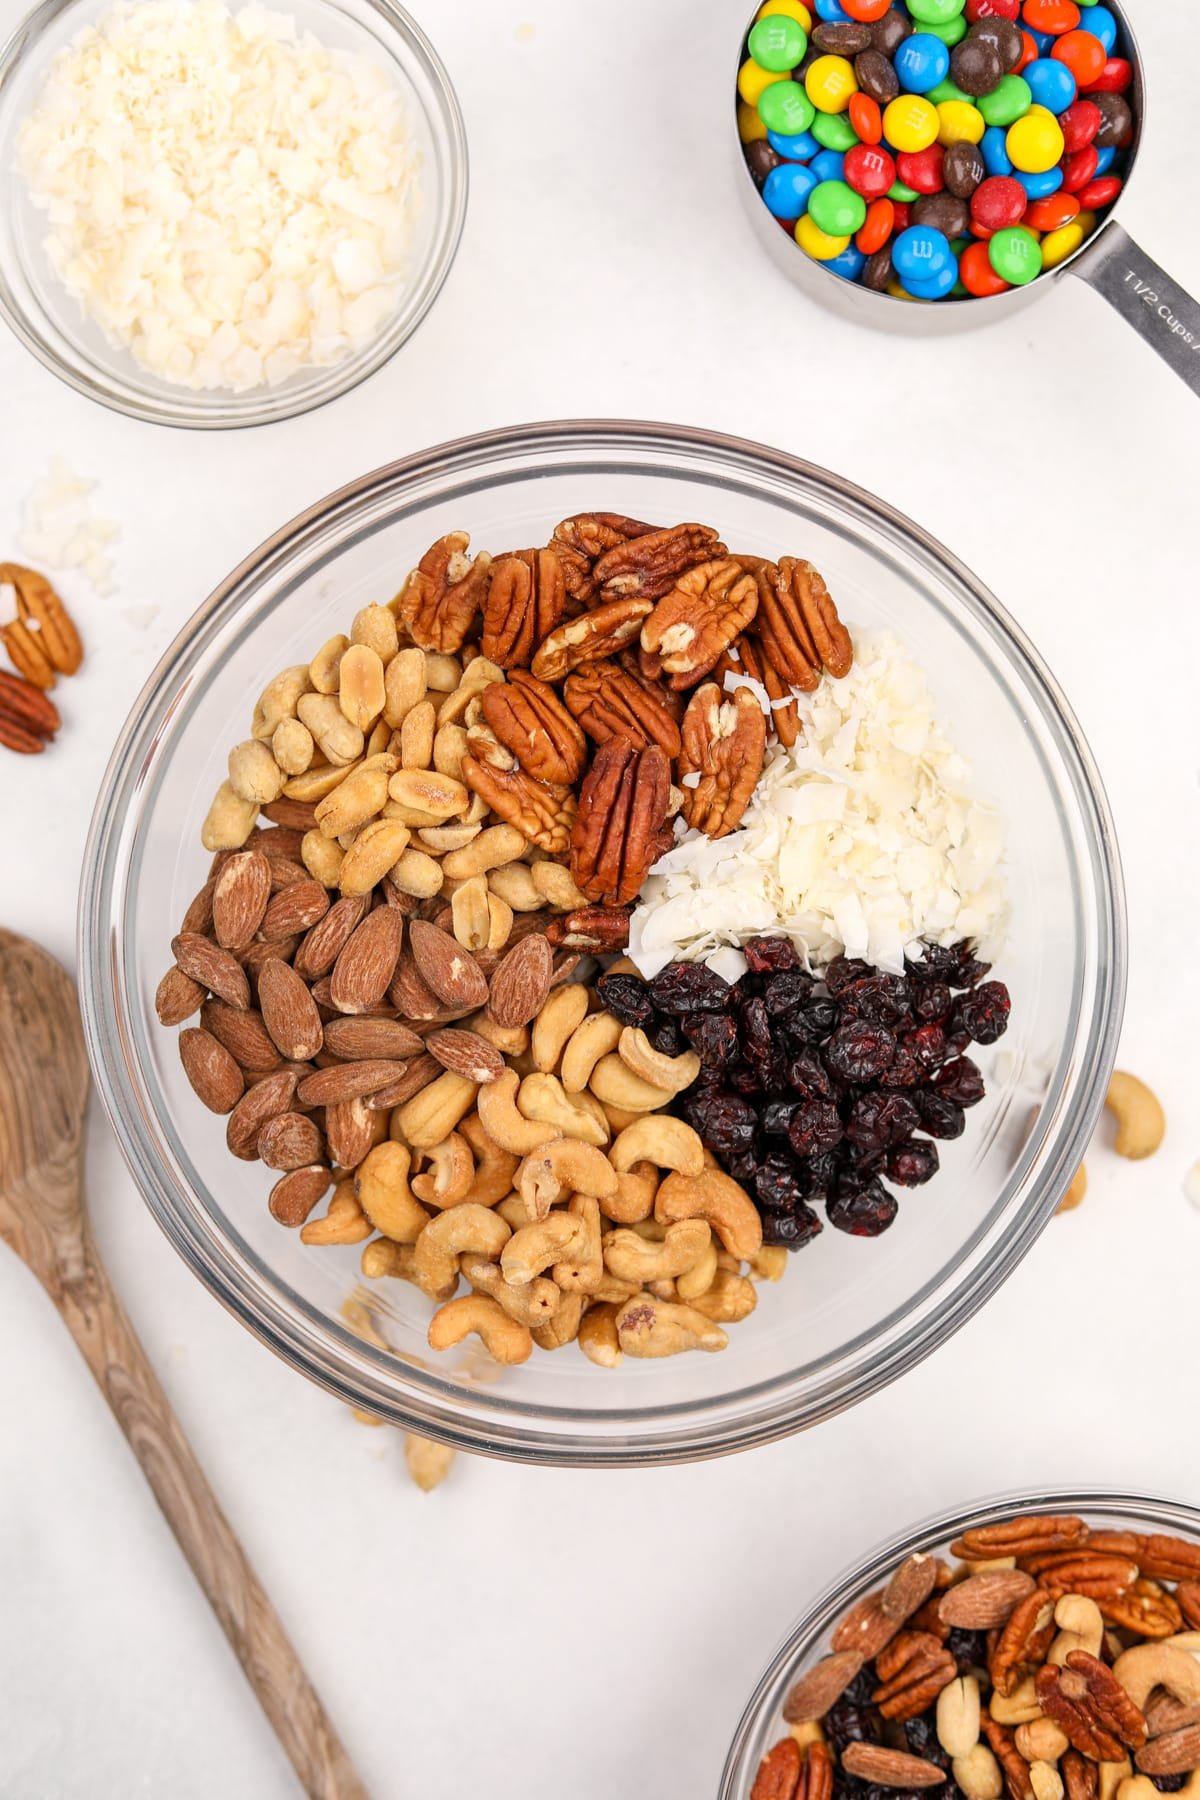 A bowl filled with different sections of nuts, coconut, and dried fruit.